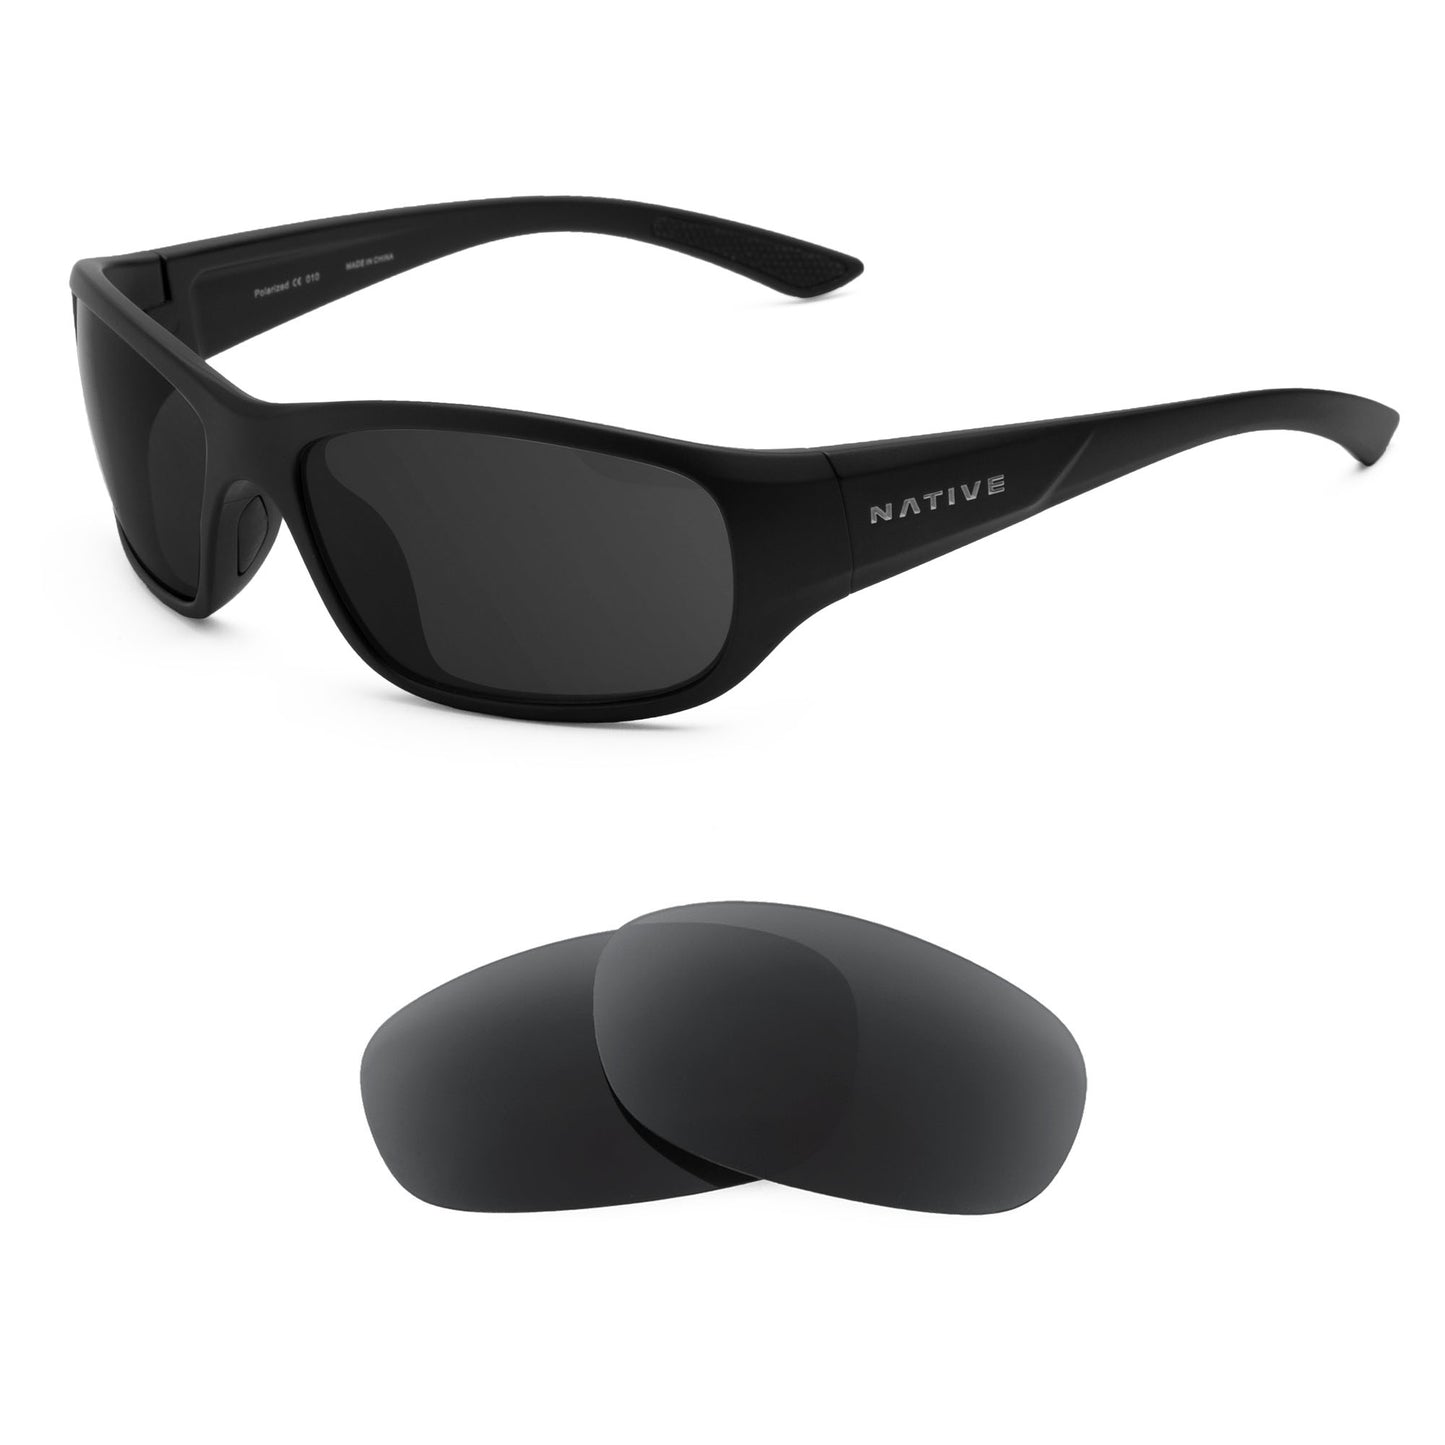 Native Throttle AF sunglasses with replacement lenses